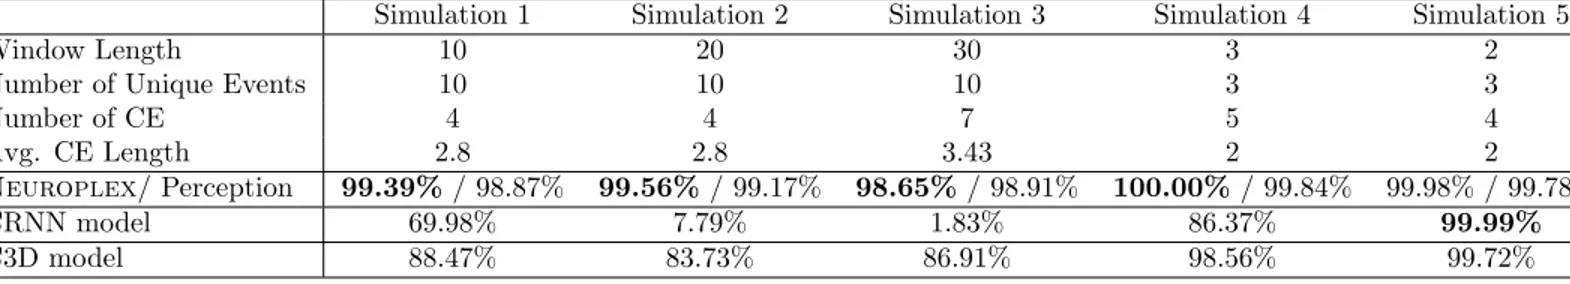 Table 2: Summary of CE datasets and training performance of different meth- meth-ods. Simulation 1, 2 and 3 are complex event tasks with normal complexity